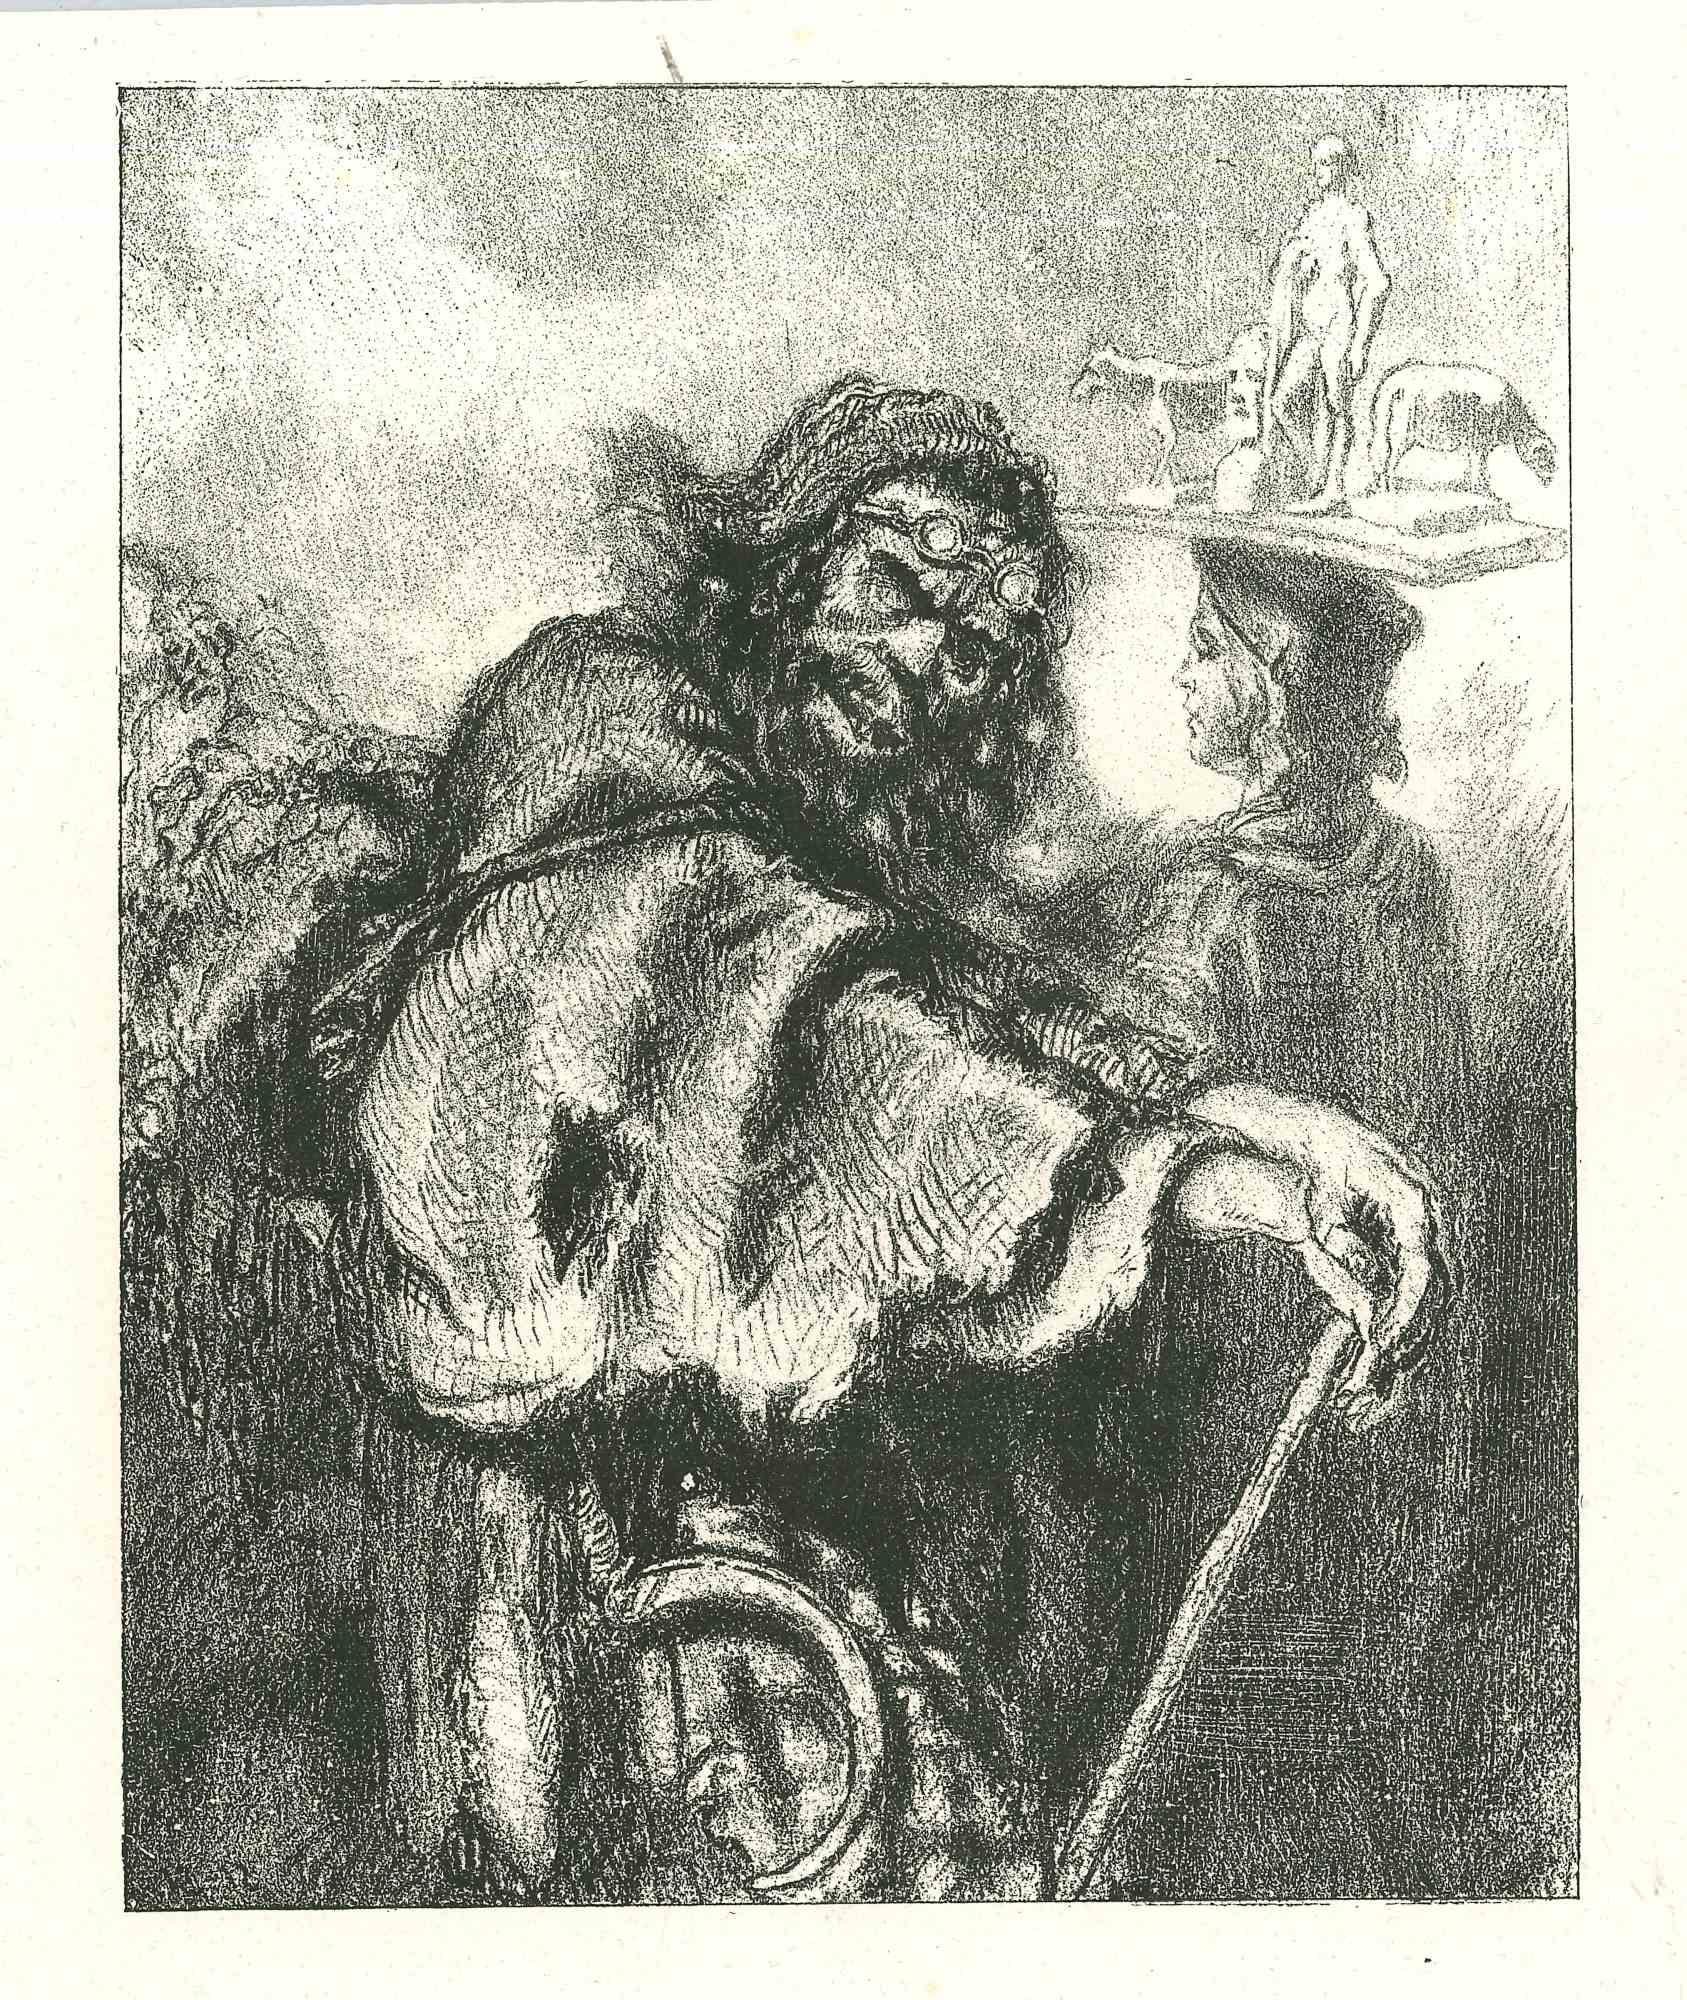 The Rage and Agony - Original Lithograph by Paul Gavarni - 1881